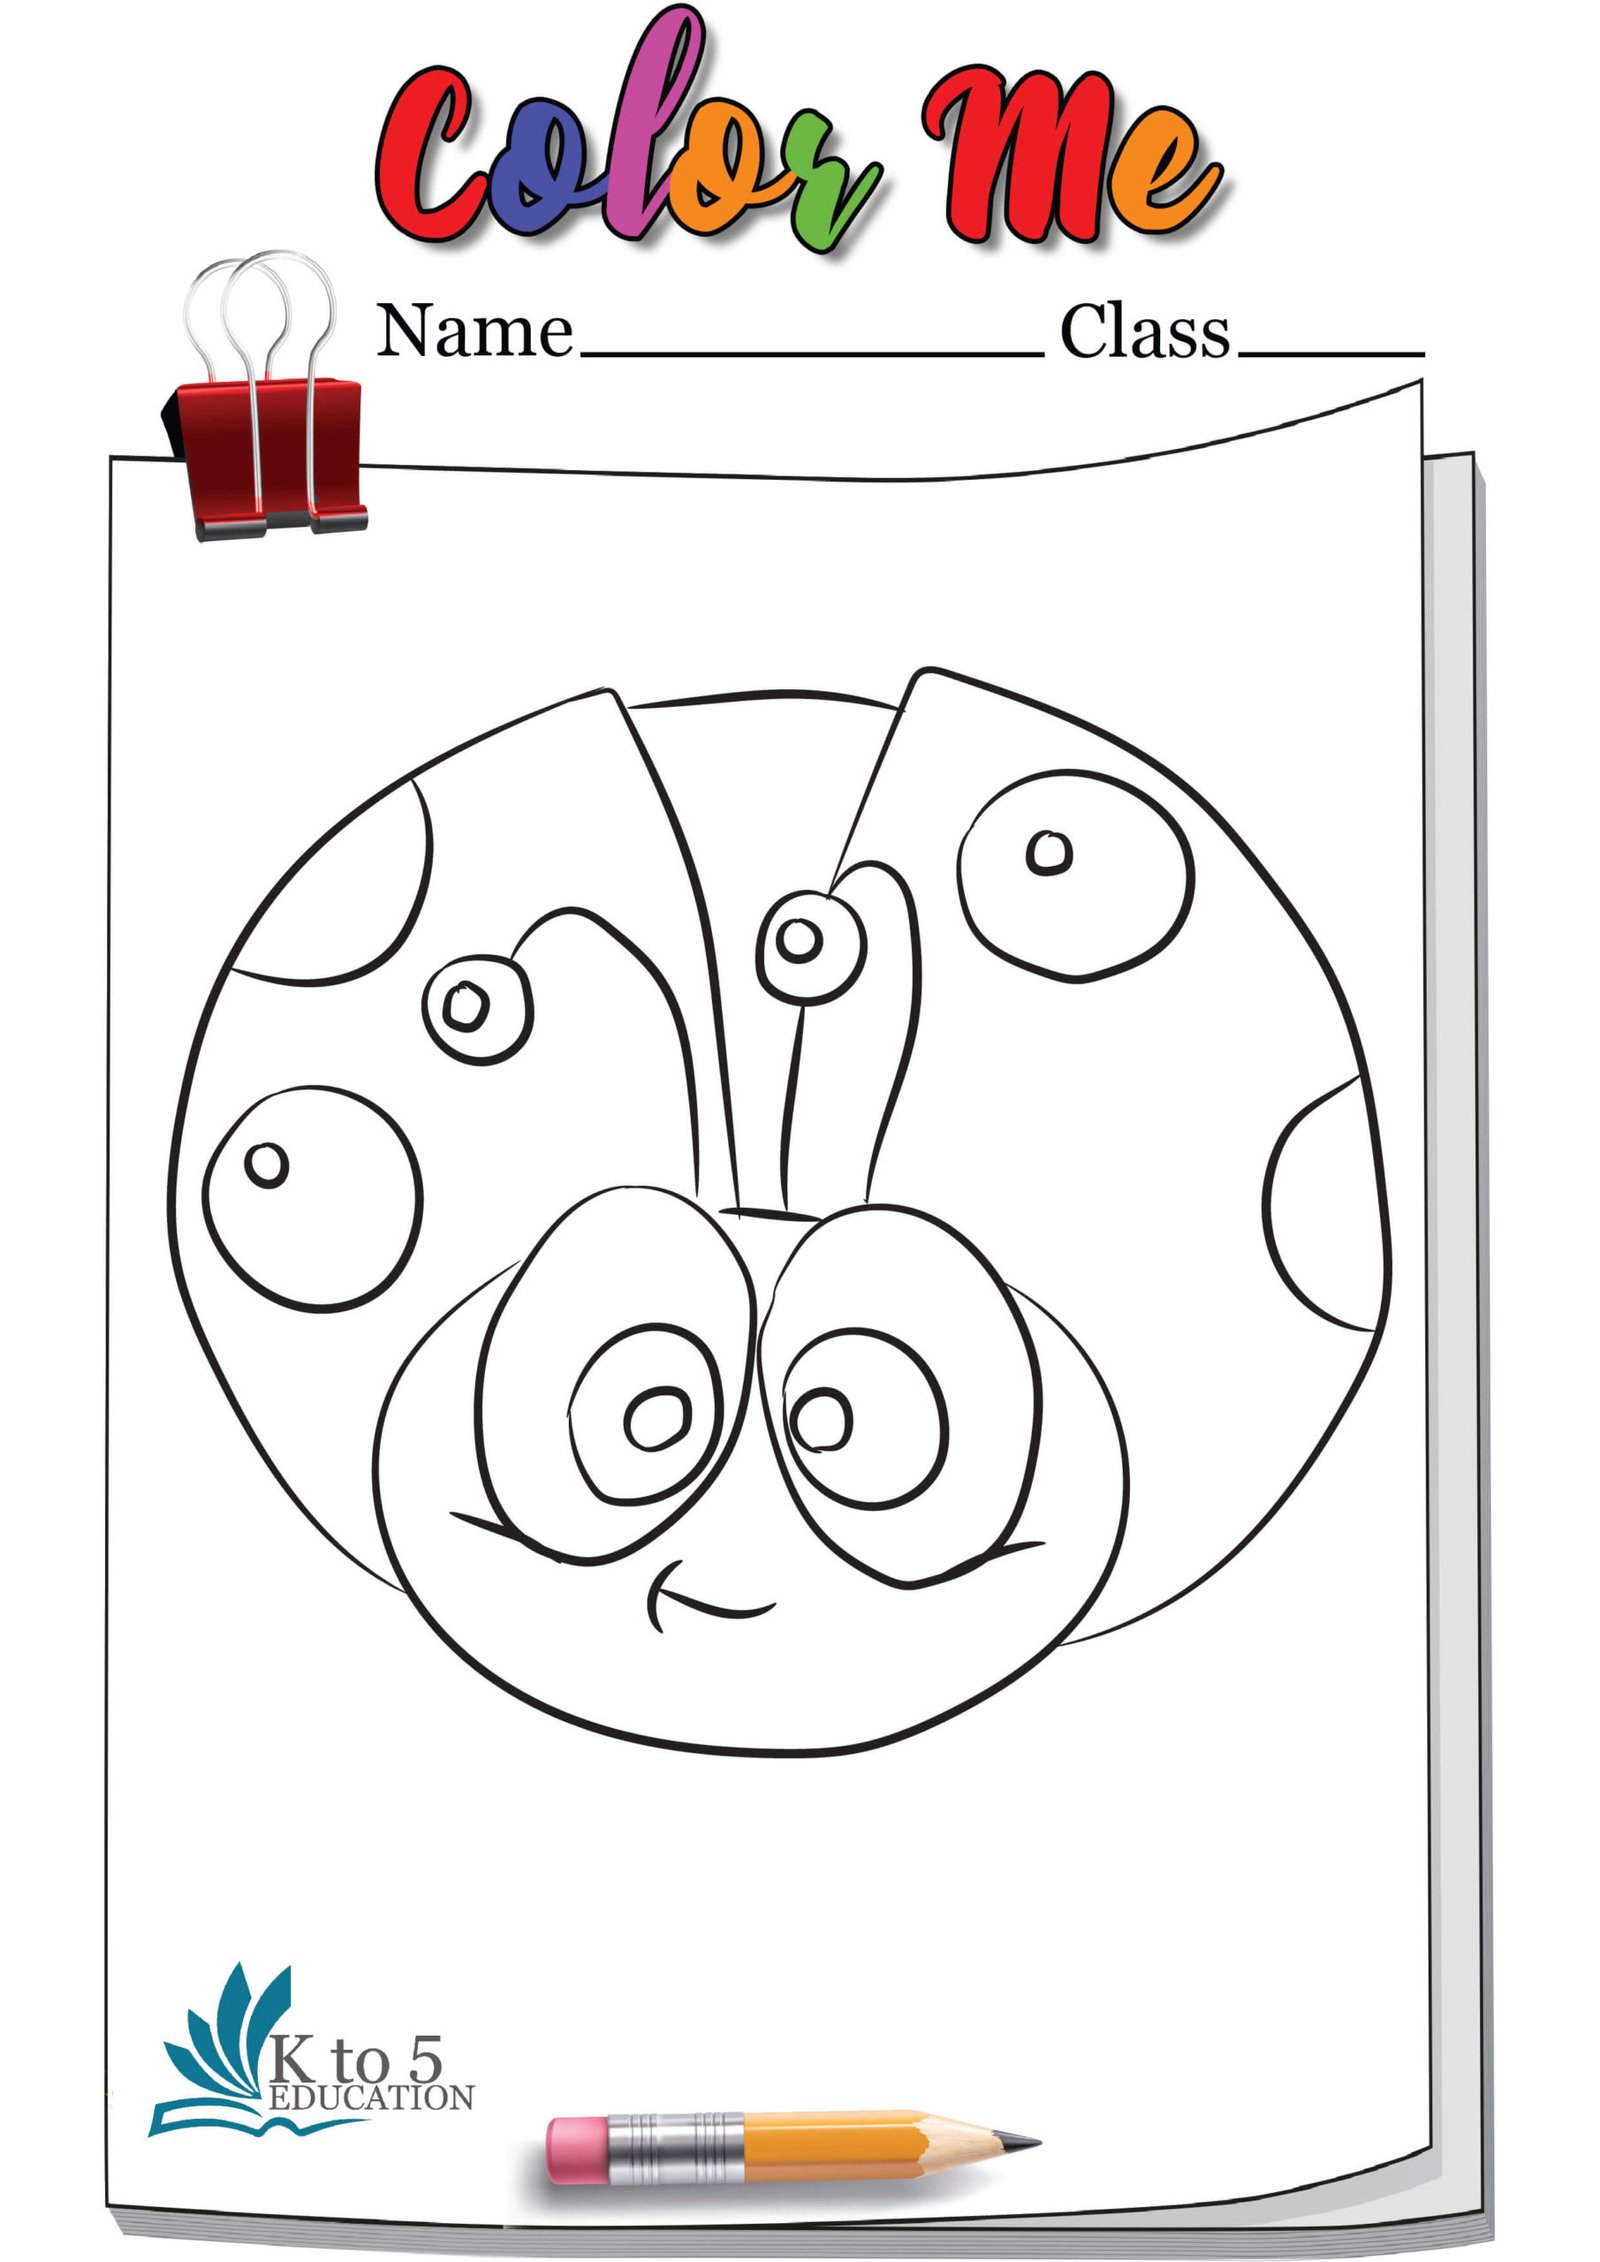 Front view Ladybug coloring page worksheet